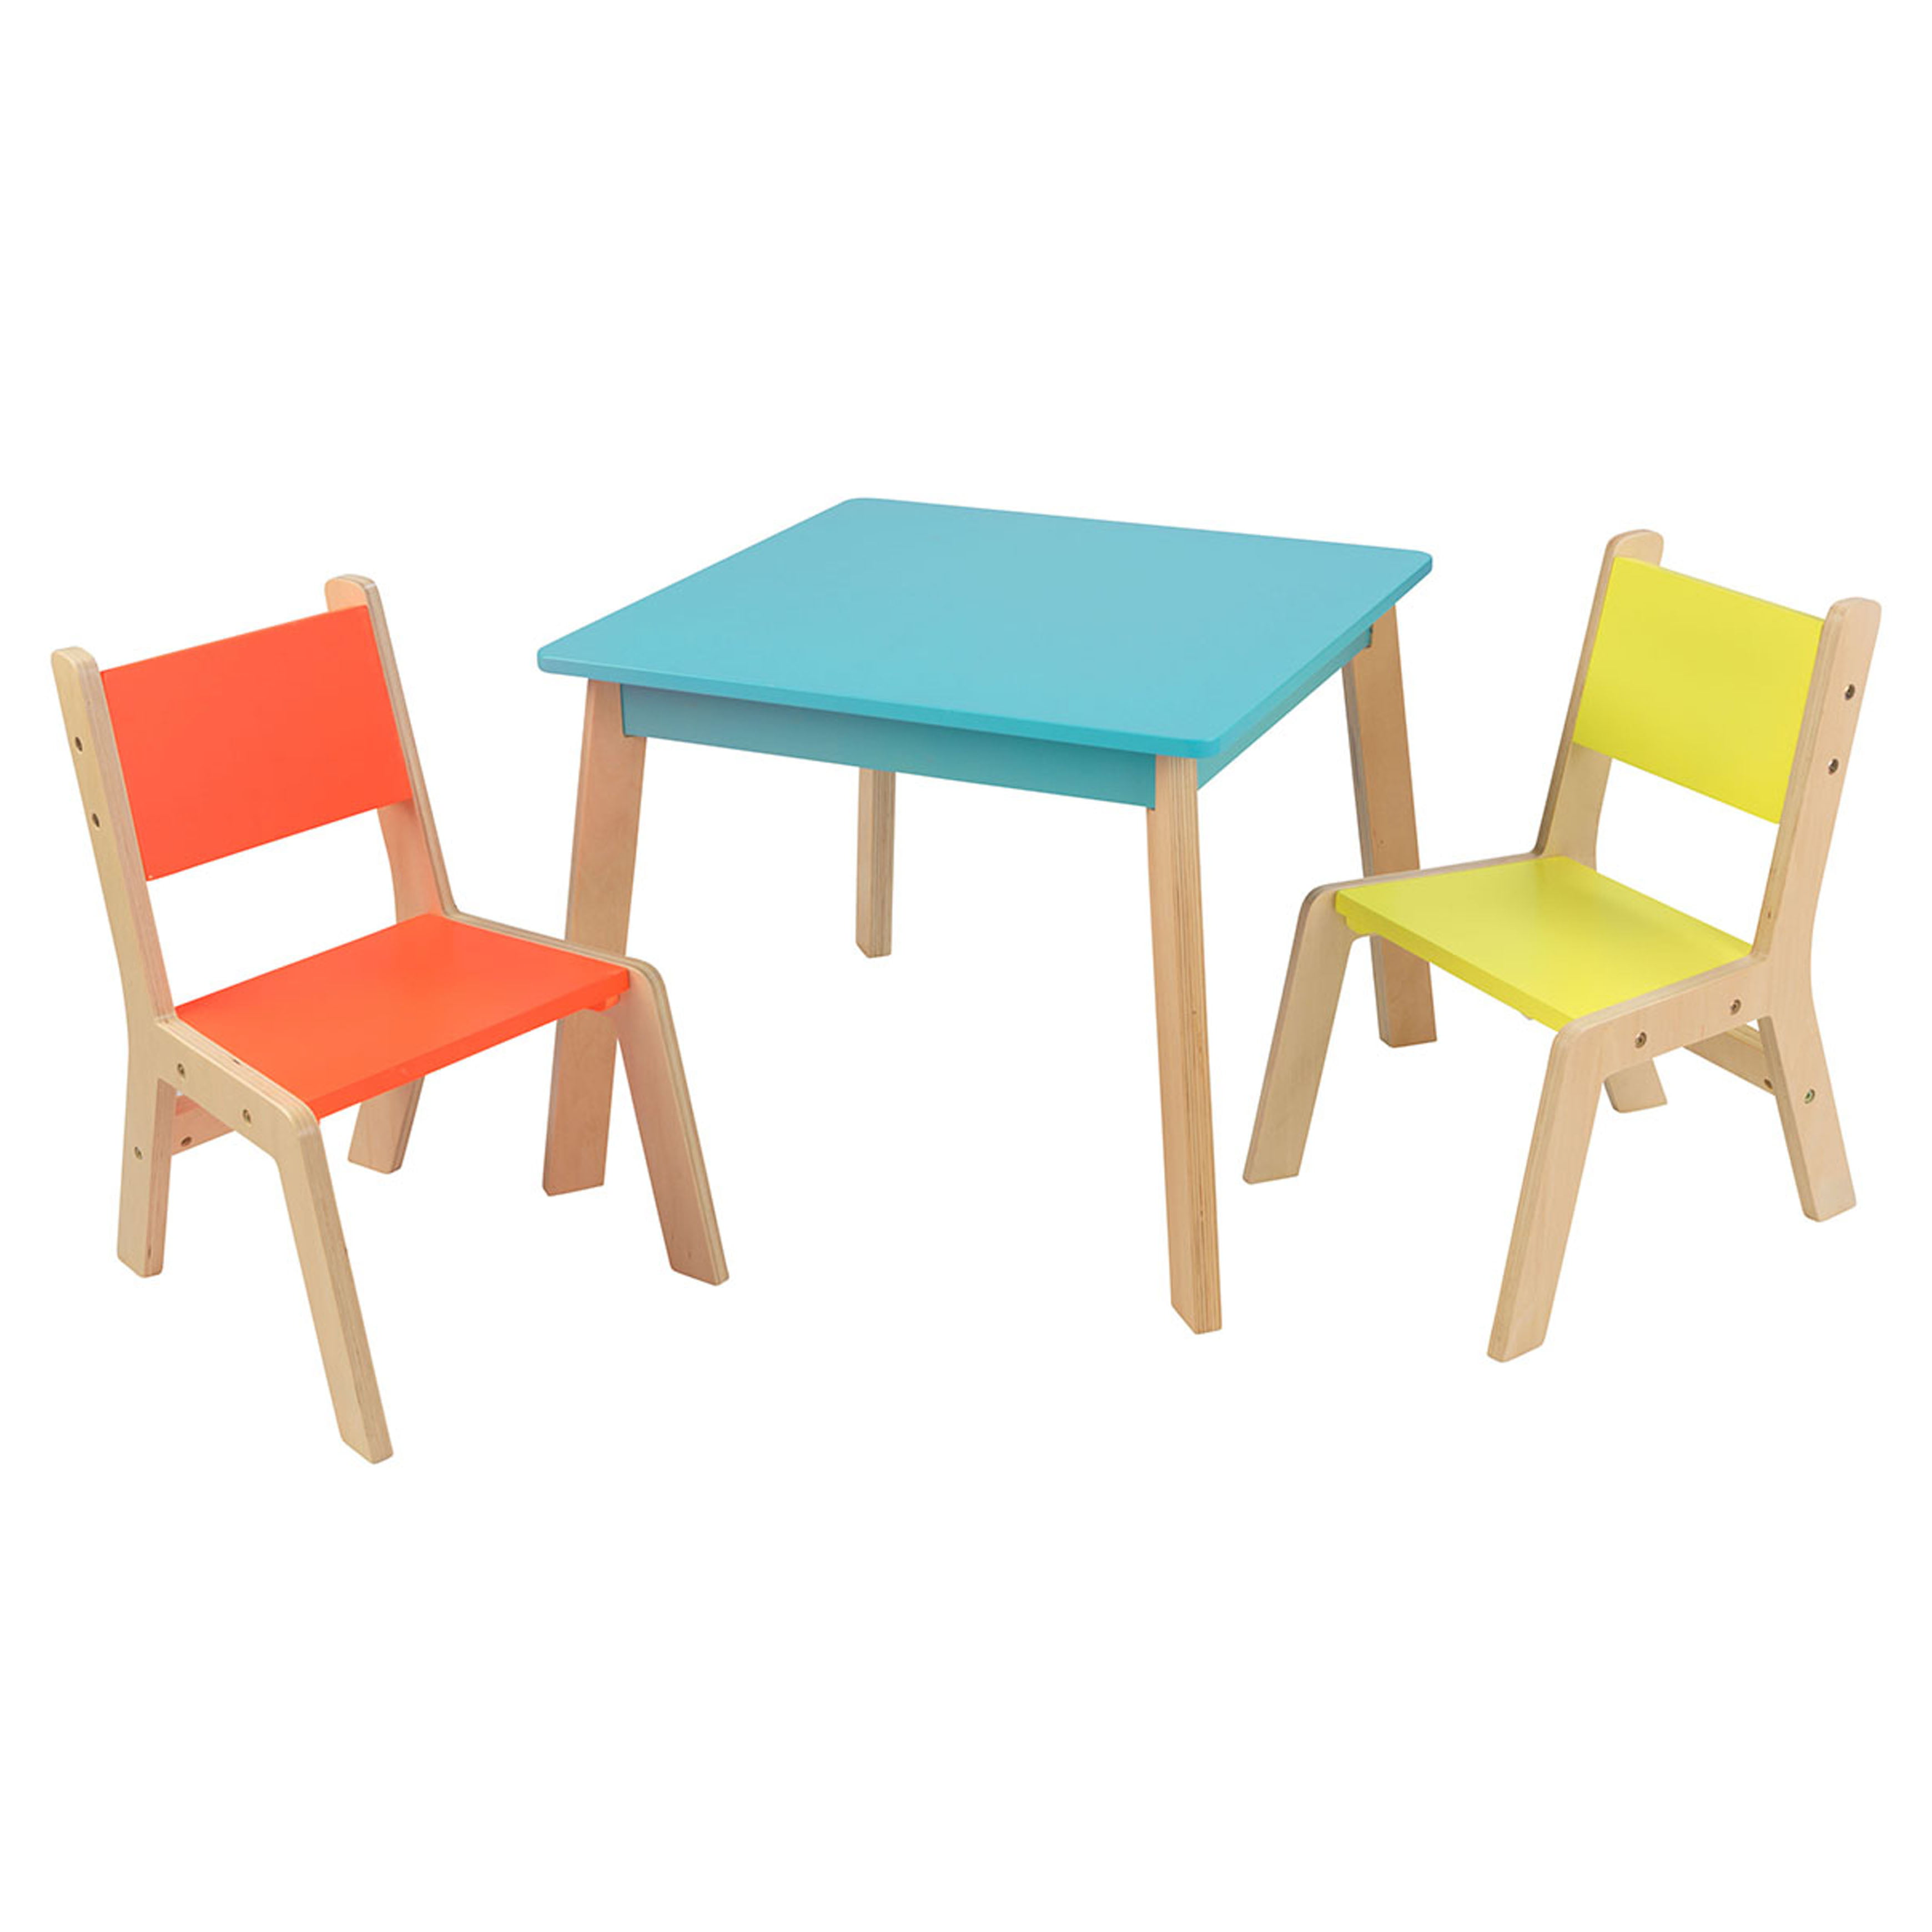 Kidkraft Modern Table 2 Chair Set Highlighter Walmart for The Awesome and Stunning childrens table and chairs set next pertaining to Motivate